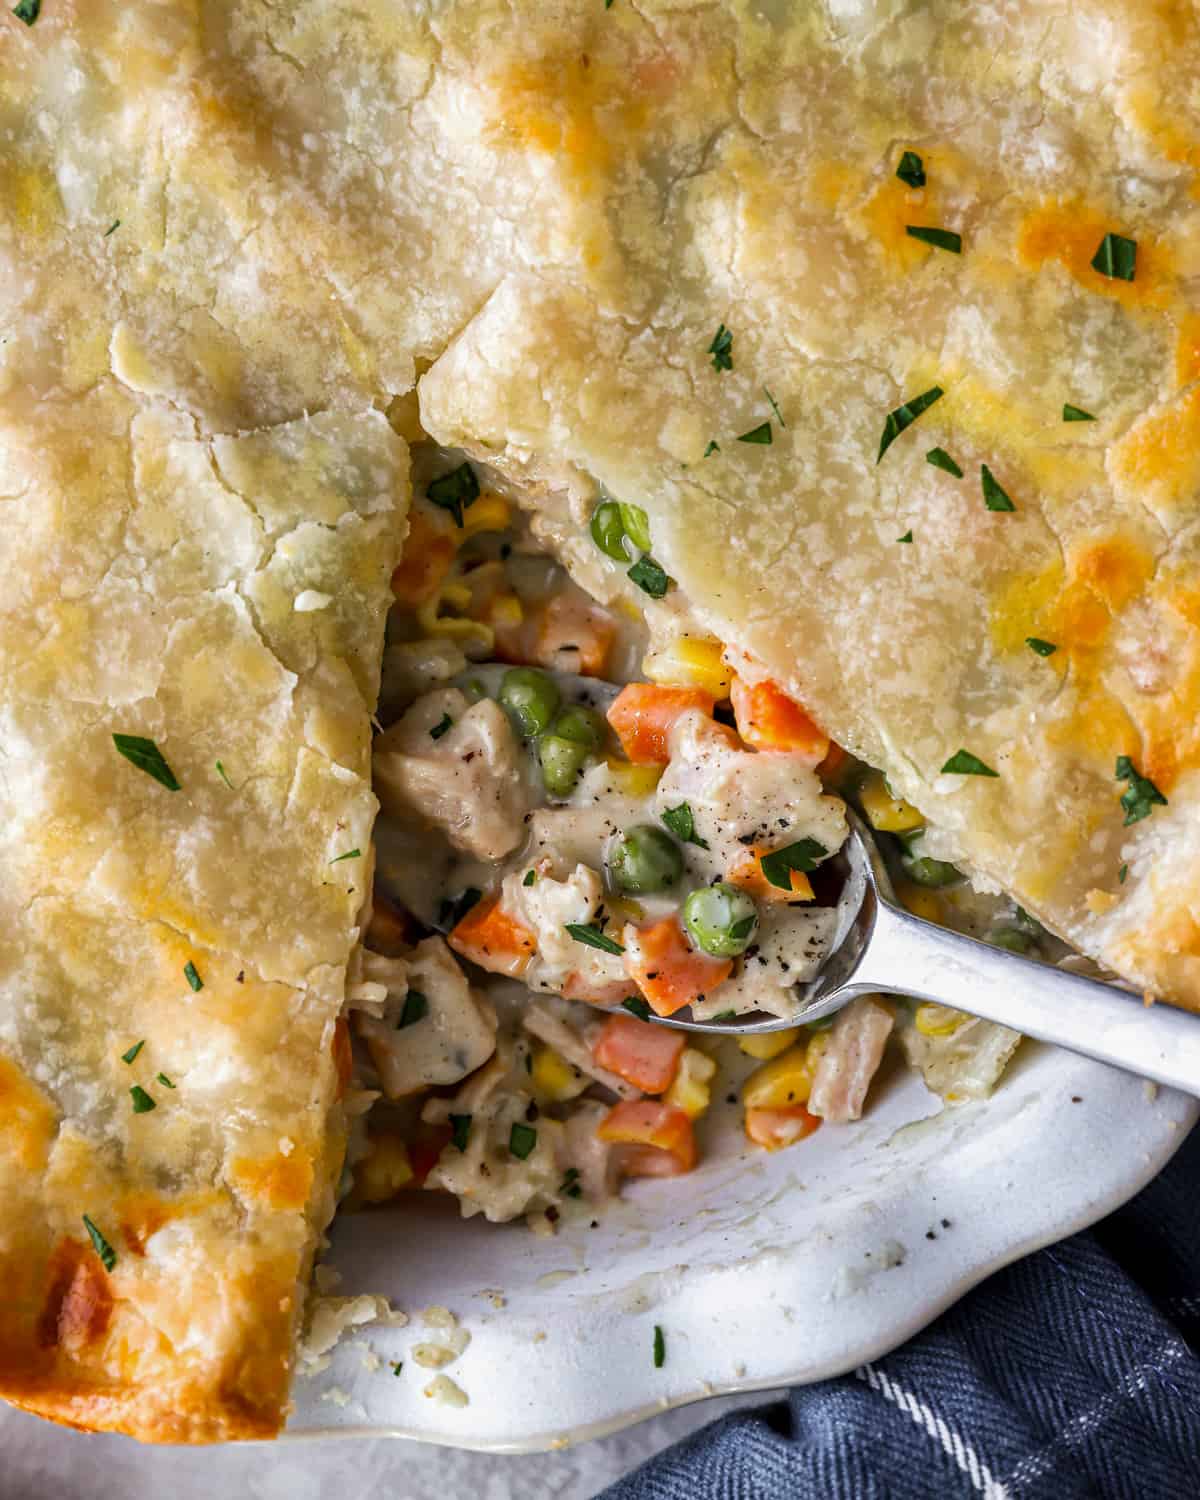 Turkey pot pie on a white plate with a spoon.